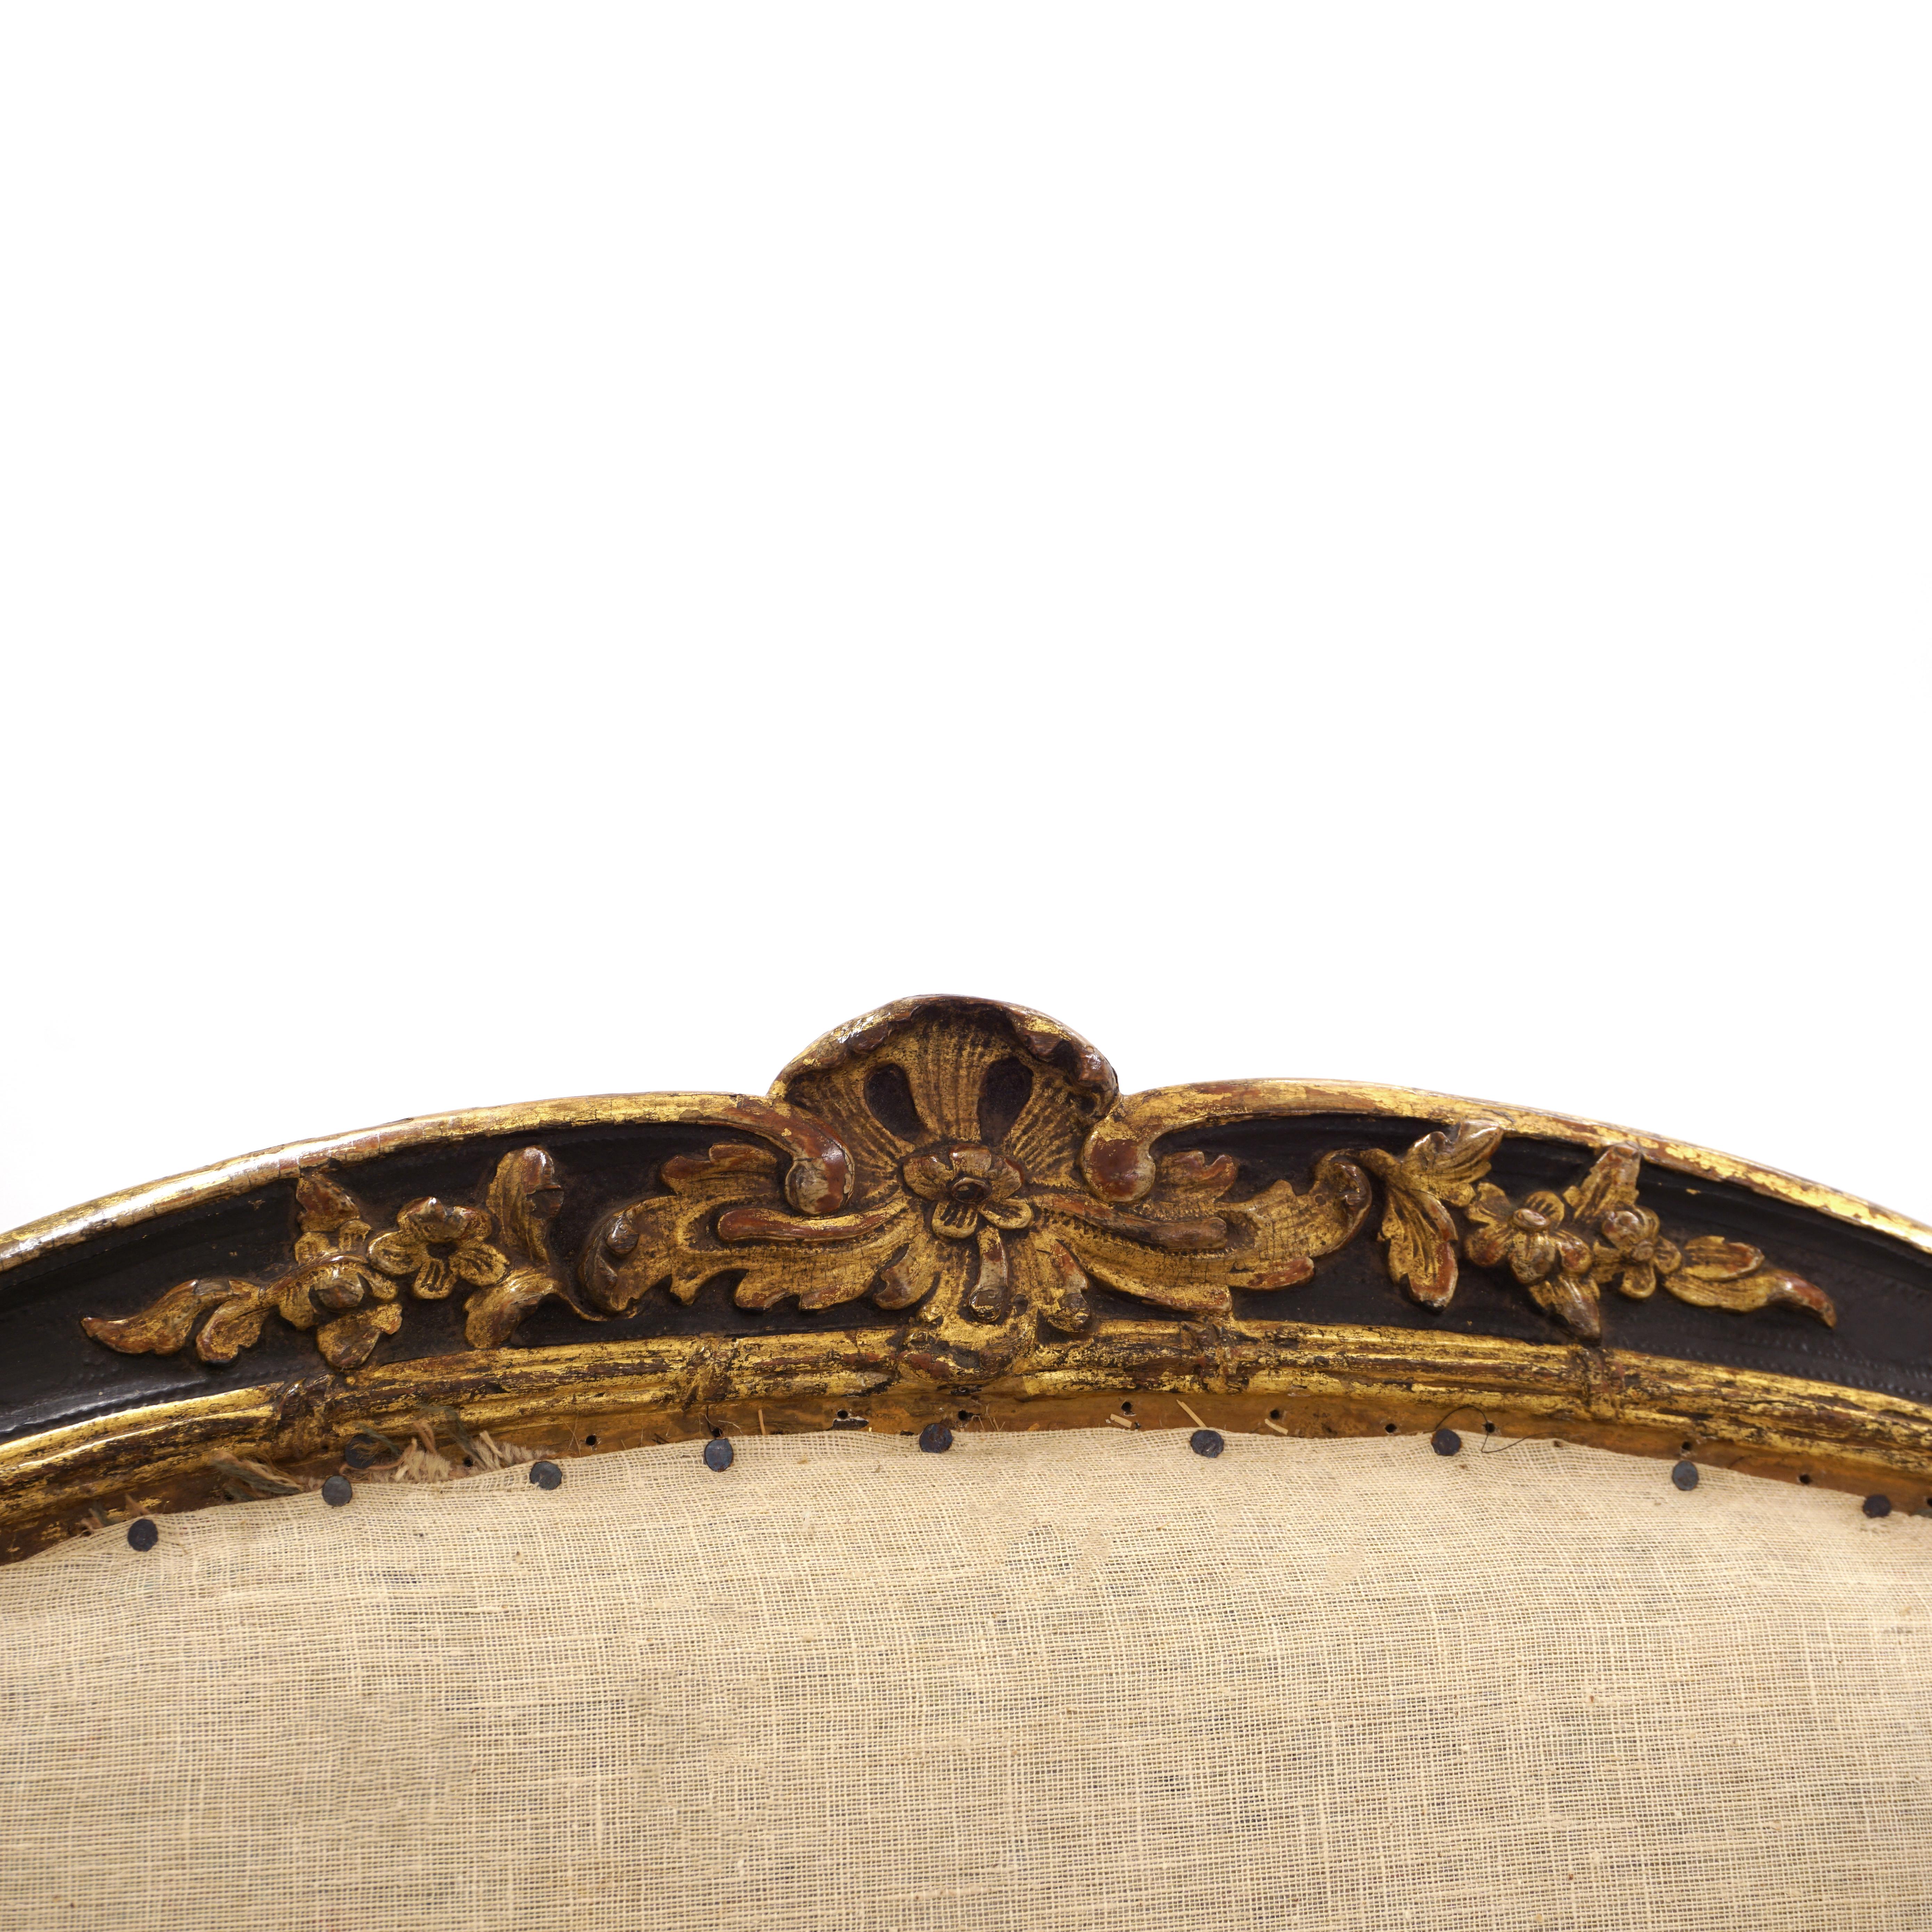 Wood Impressive Pair of French Mid 18th Century Black and Gilt Rococo Armchairs For Sale